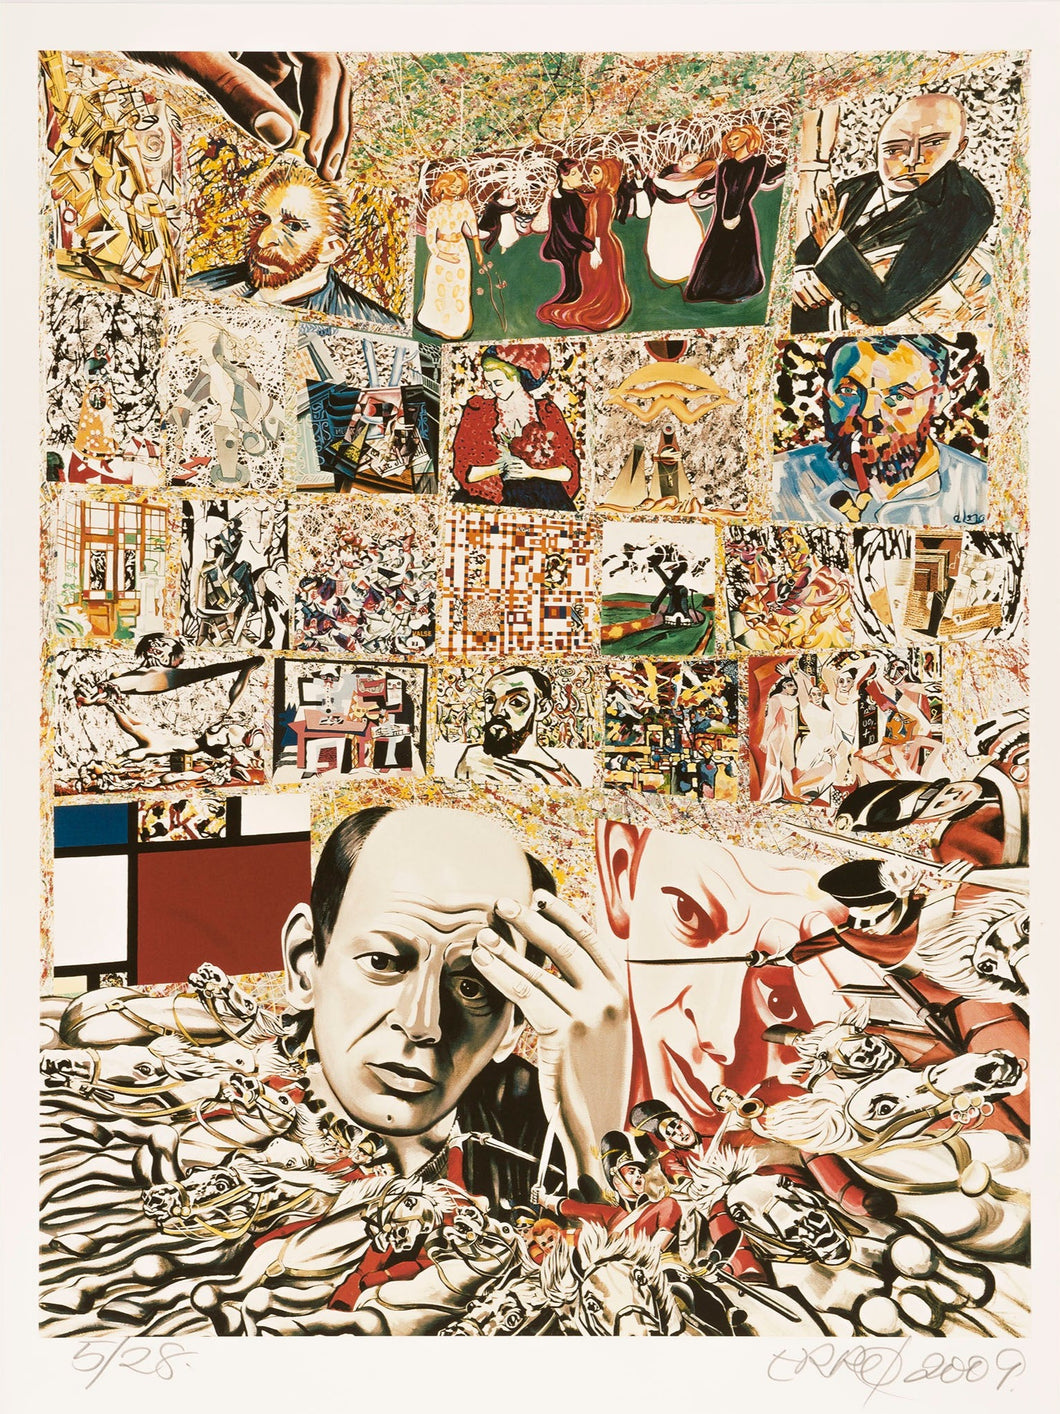 Erró, The Background of Pollock